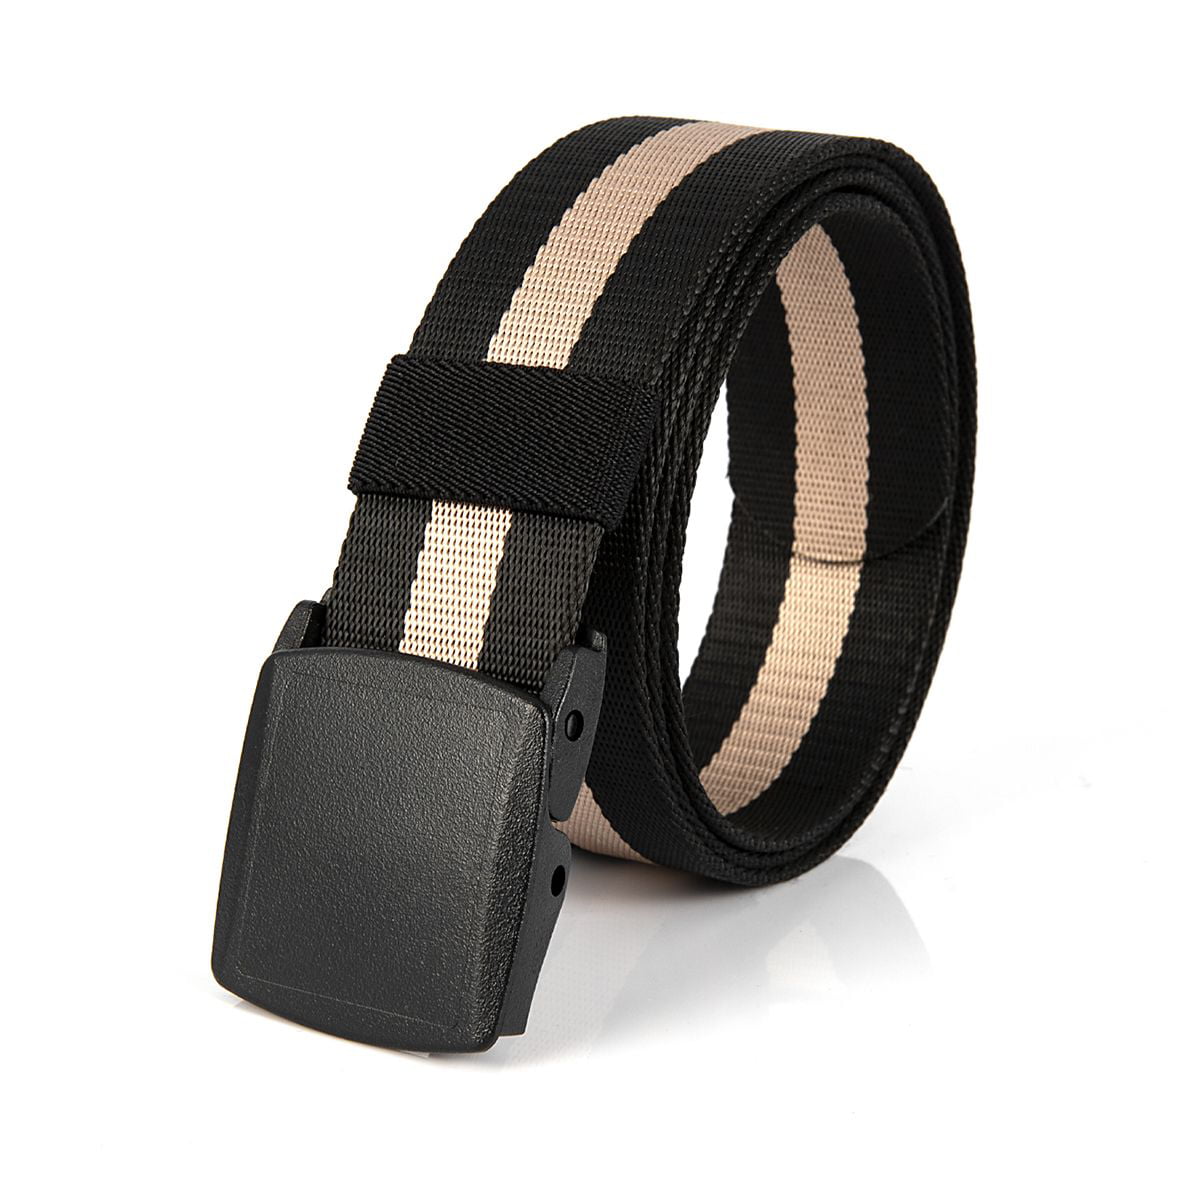 2 Pack Mens Belts 1.49 Military Tactical Belt With Plastic Buckle 